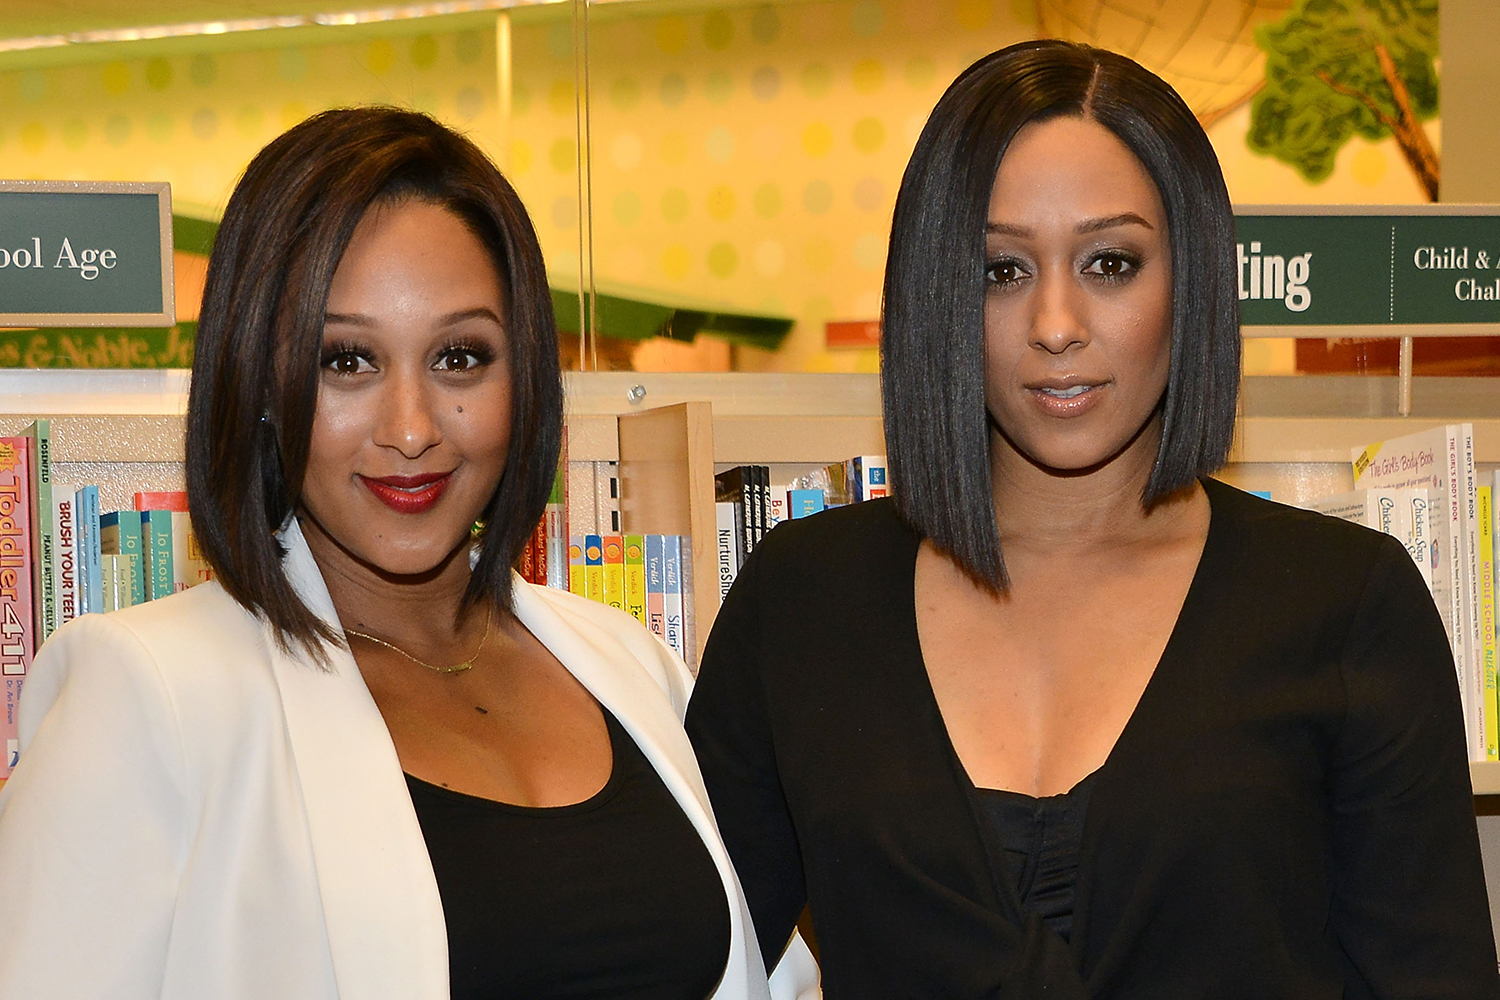 Tia Mowry Son Kree with a New Look at School!